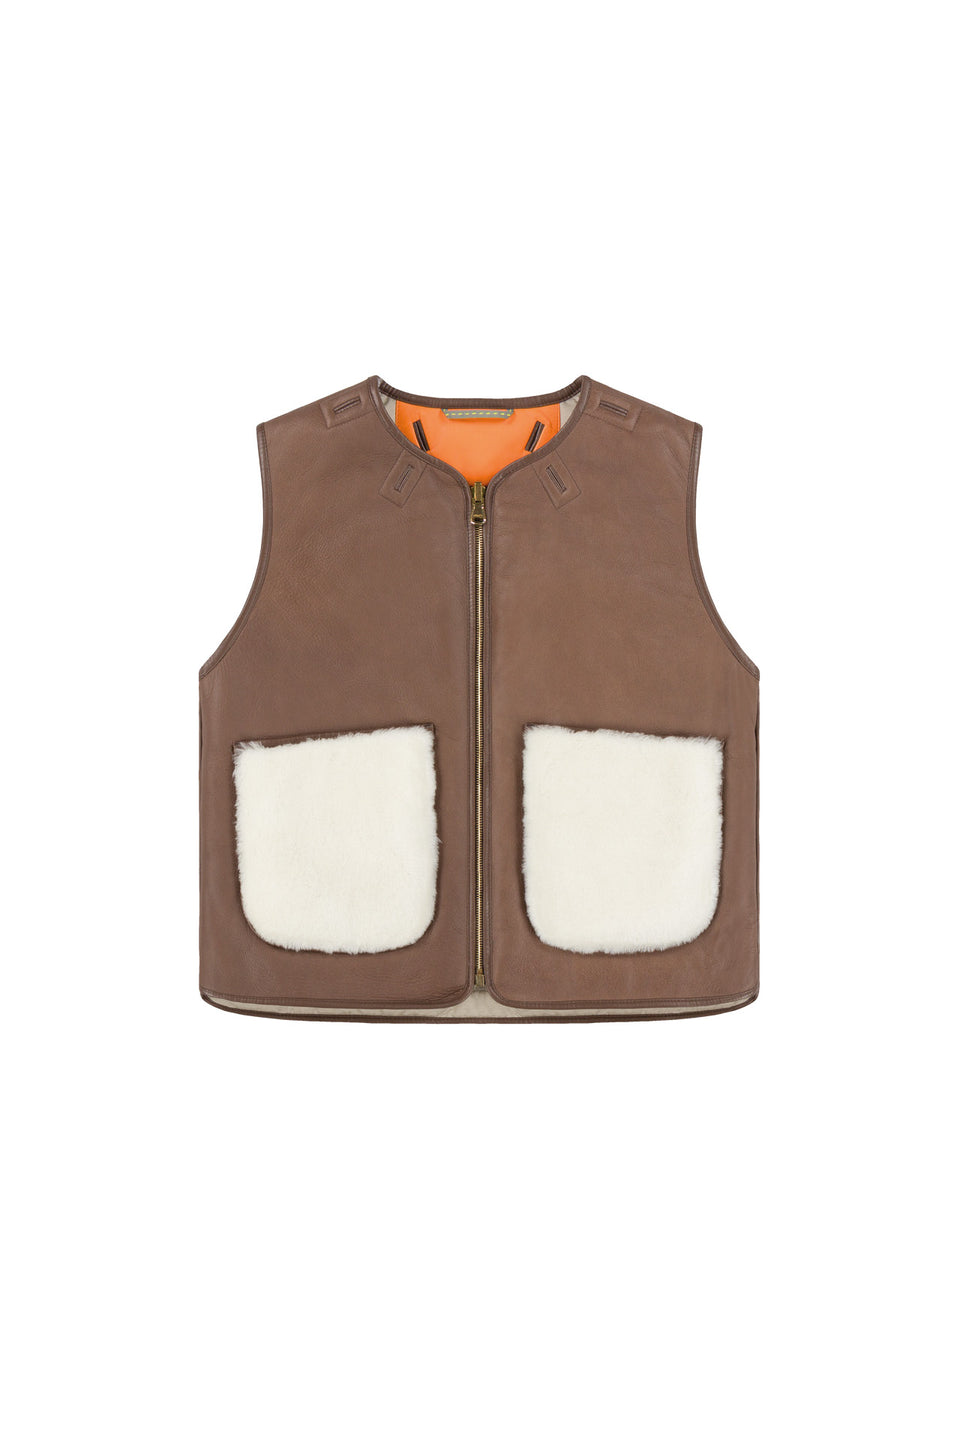 Cropped Aviator Shearling Vest - Chocolate / Natural (listing page thumbnail)